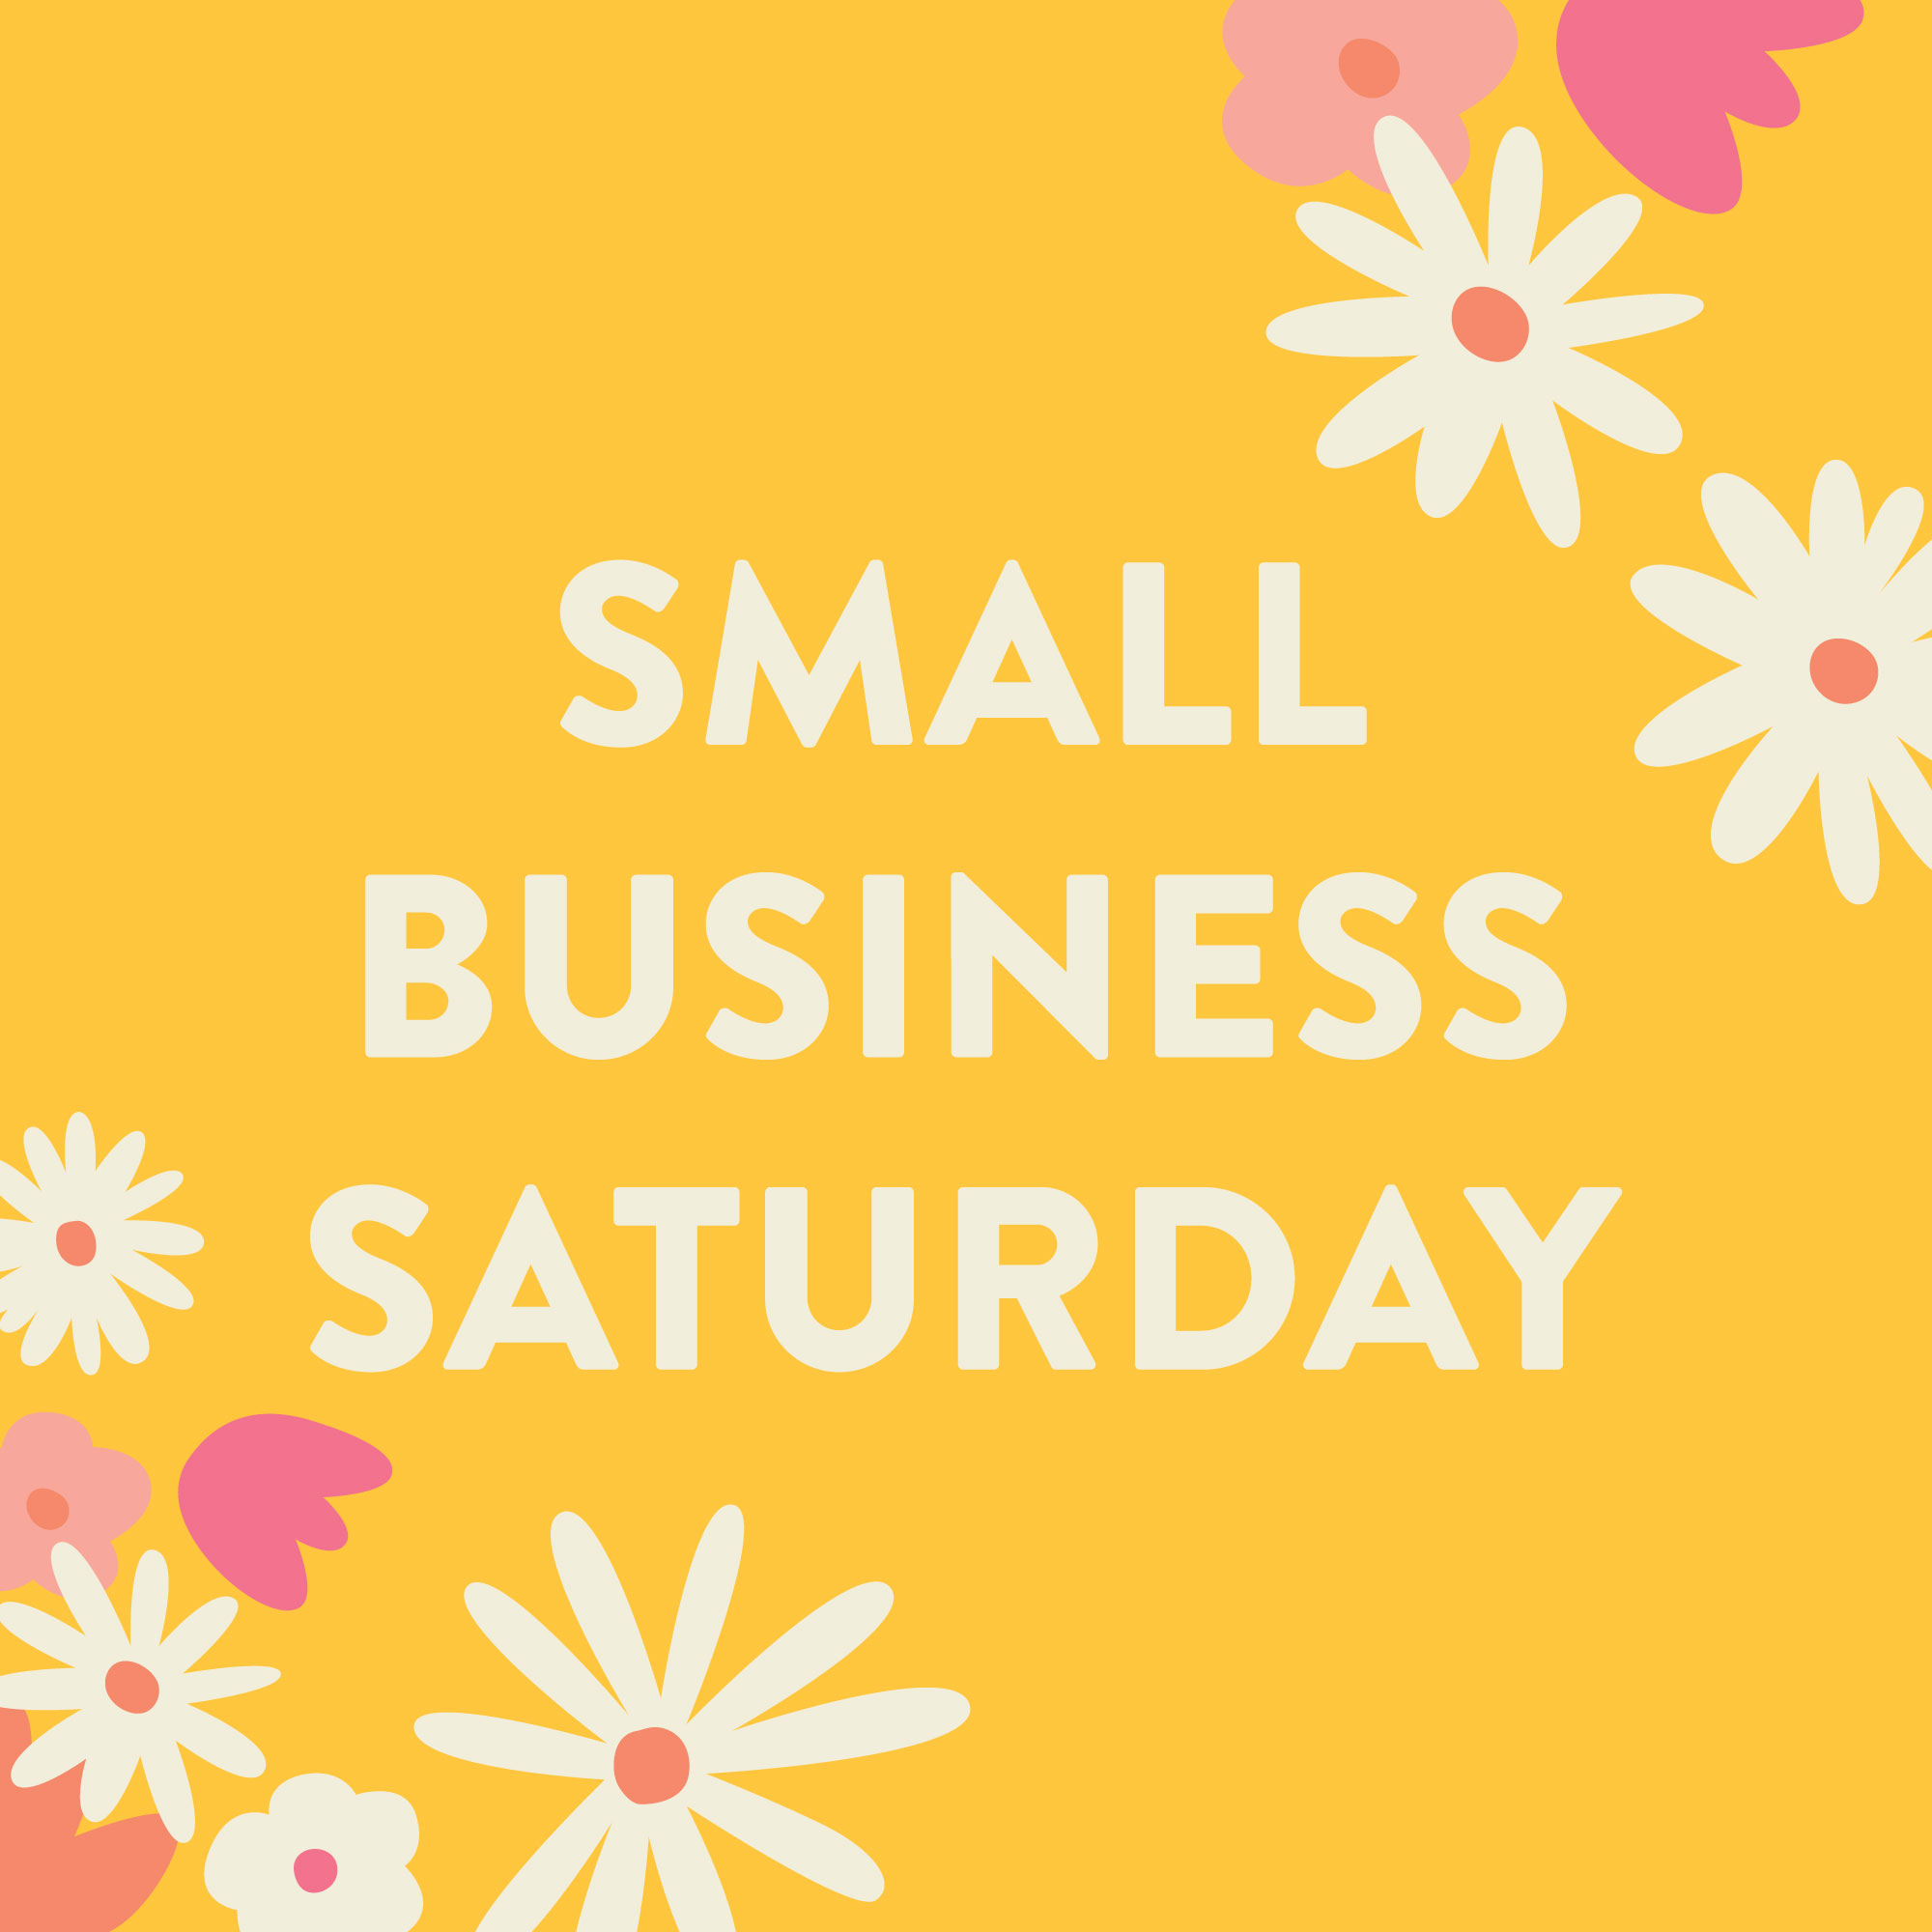 Favorite Small Business Saturday Shops to Support